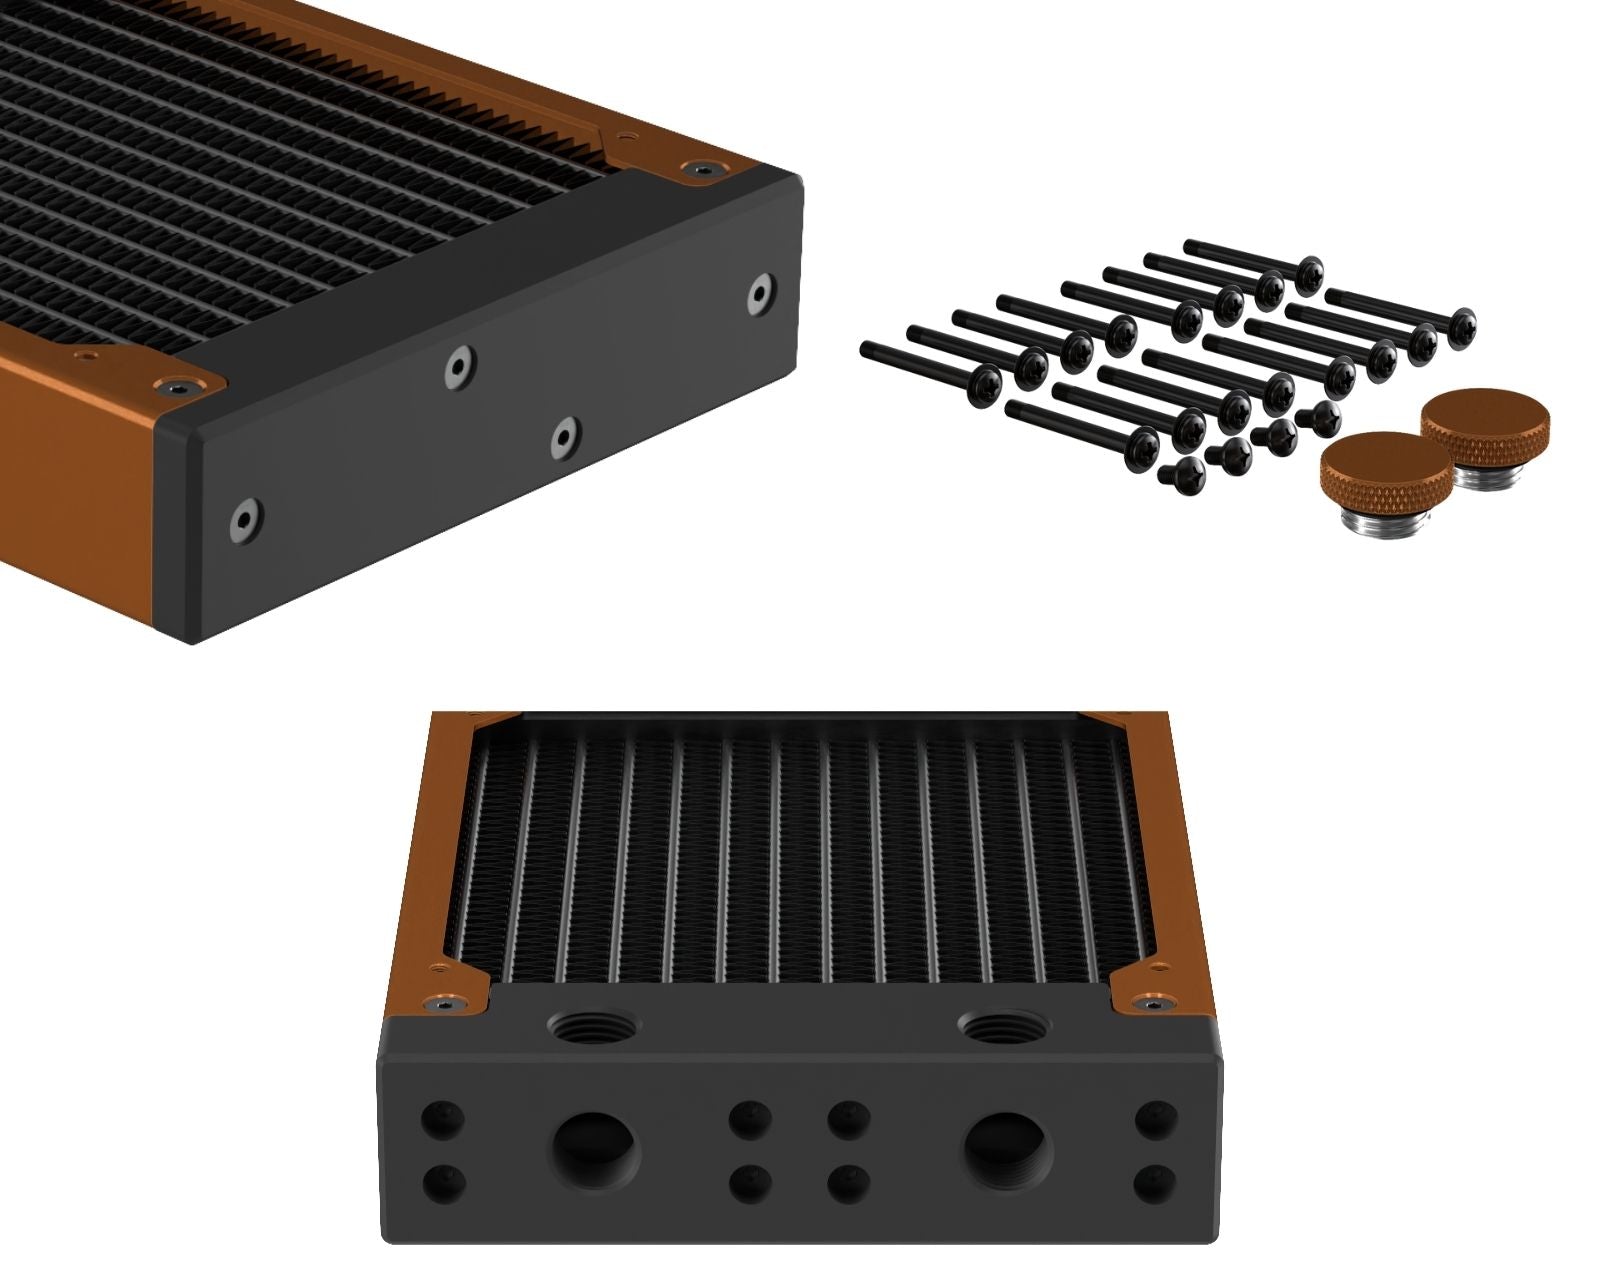 PrimoChill 480SL (30mm) EXIMO Modular Radiator, Black POM, 4x120mm, Quad Fan (R-SL-BK48) Available in 20+ Colors, Assembled in USA and Custom Watercooling Loop Ready - Copper